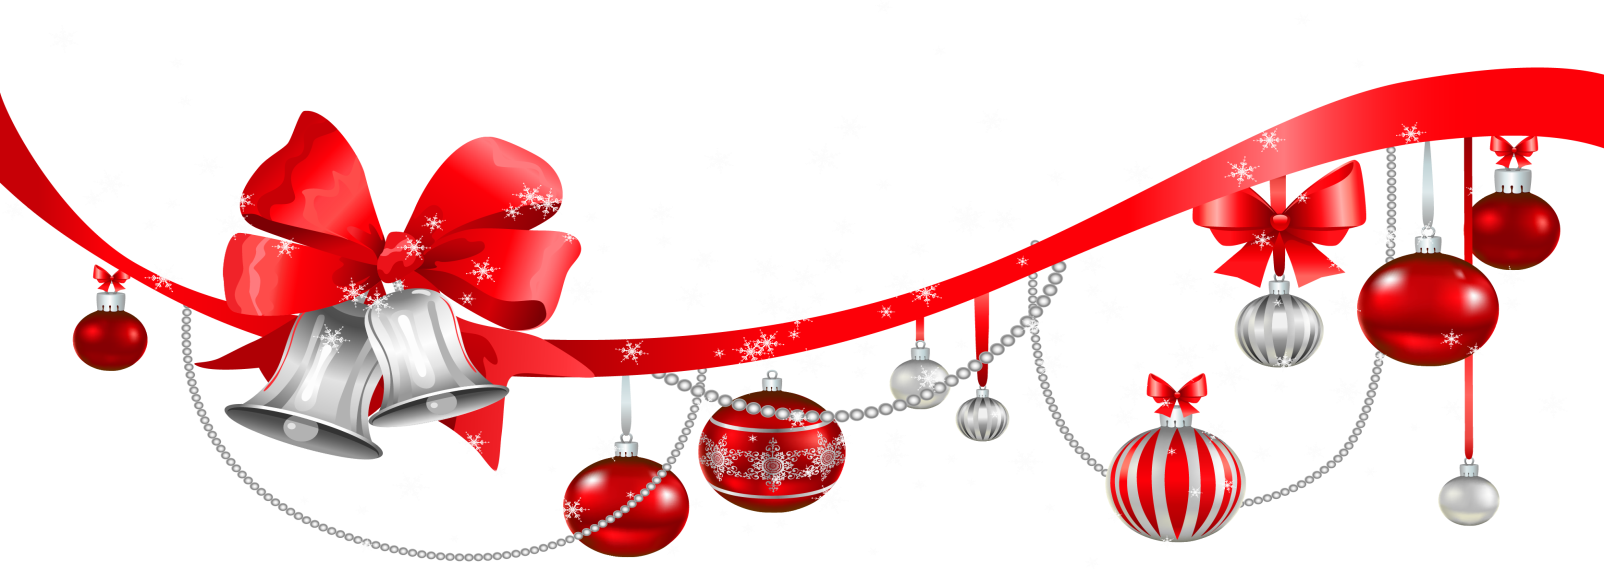 Santa Clause Is Coming To Town - Christmas Decorations Png (1024x362)